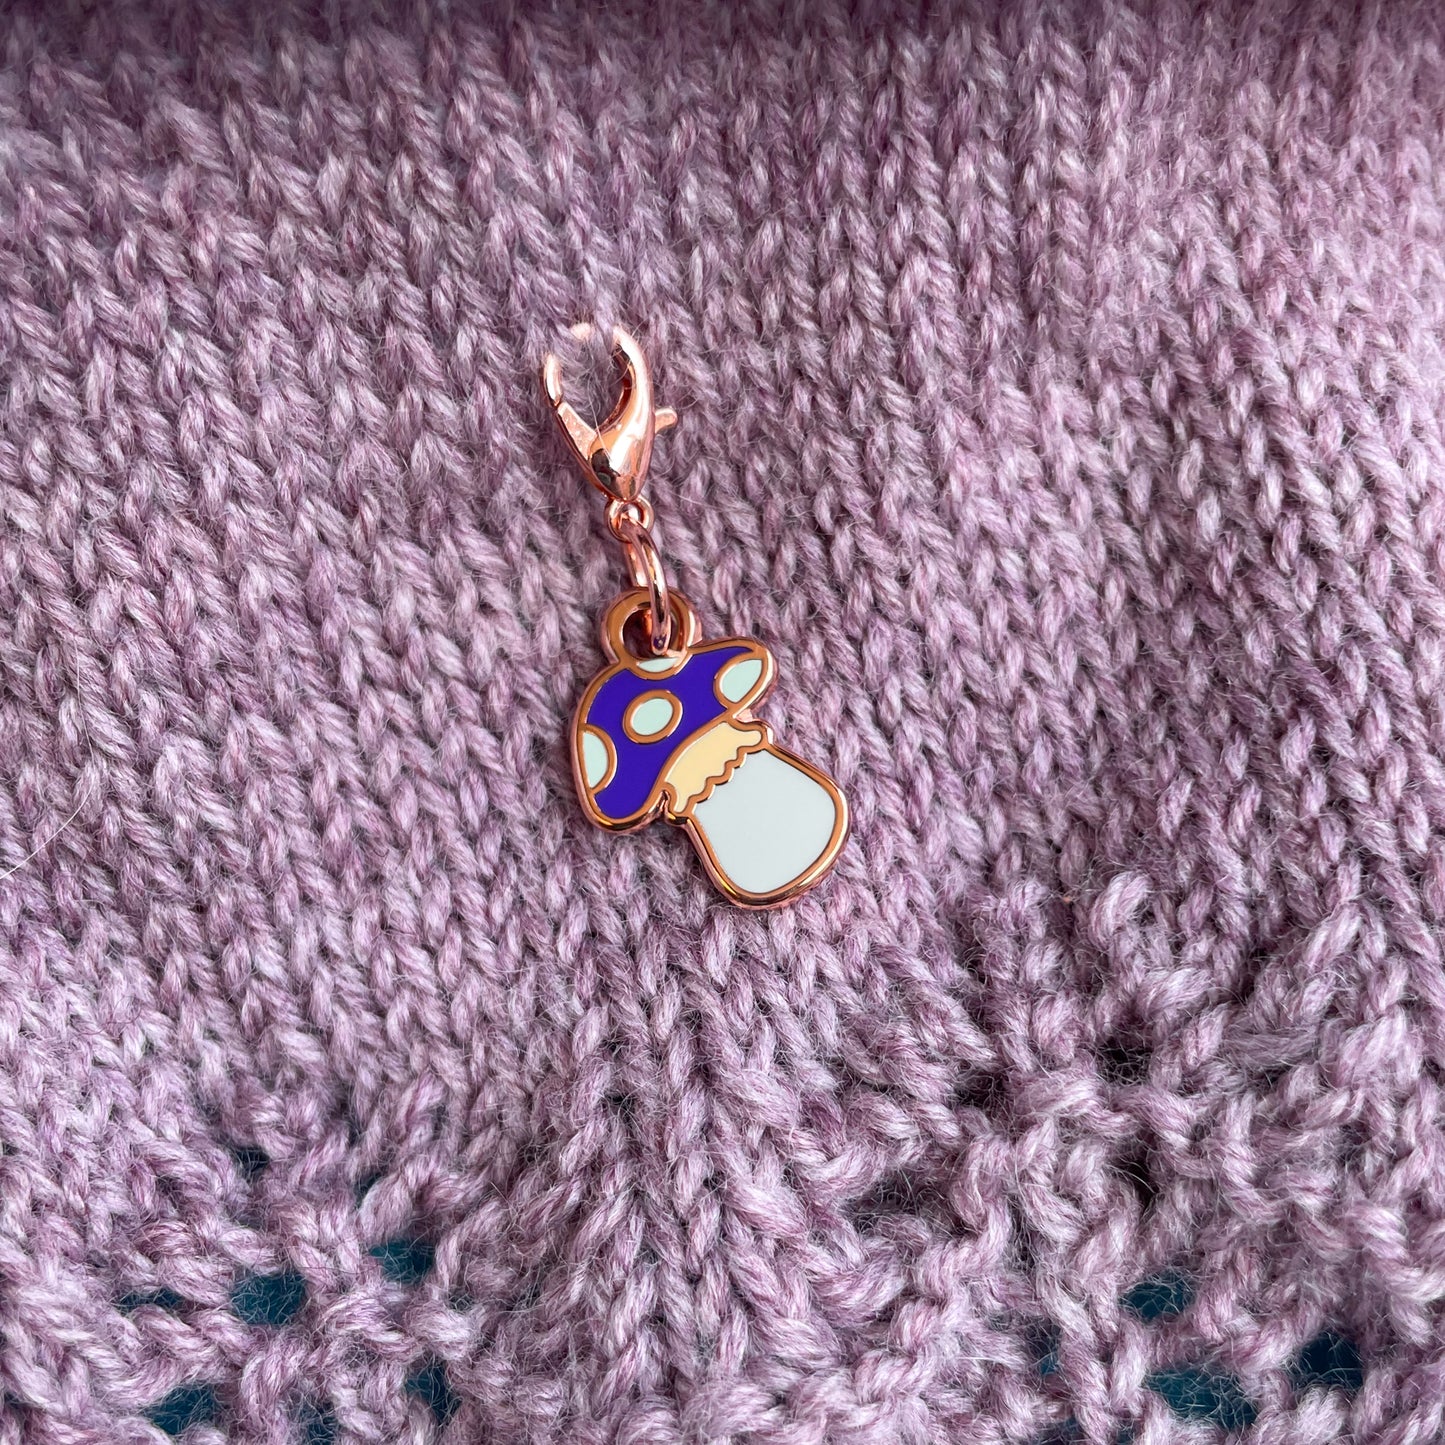 A rose gold colored mushroom shaped lobster claw clasp charm attached to a piece of mauve knitting. 